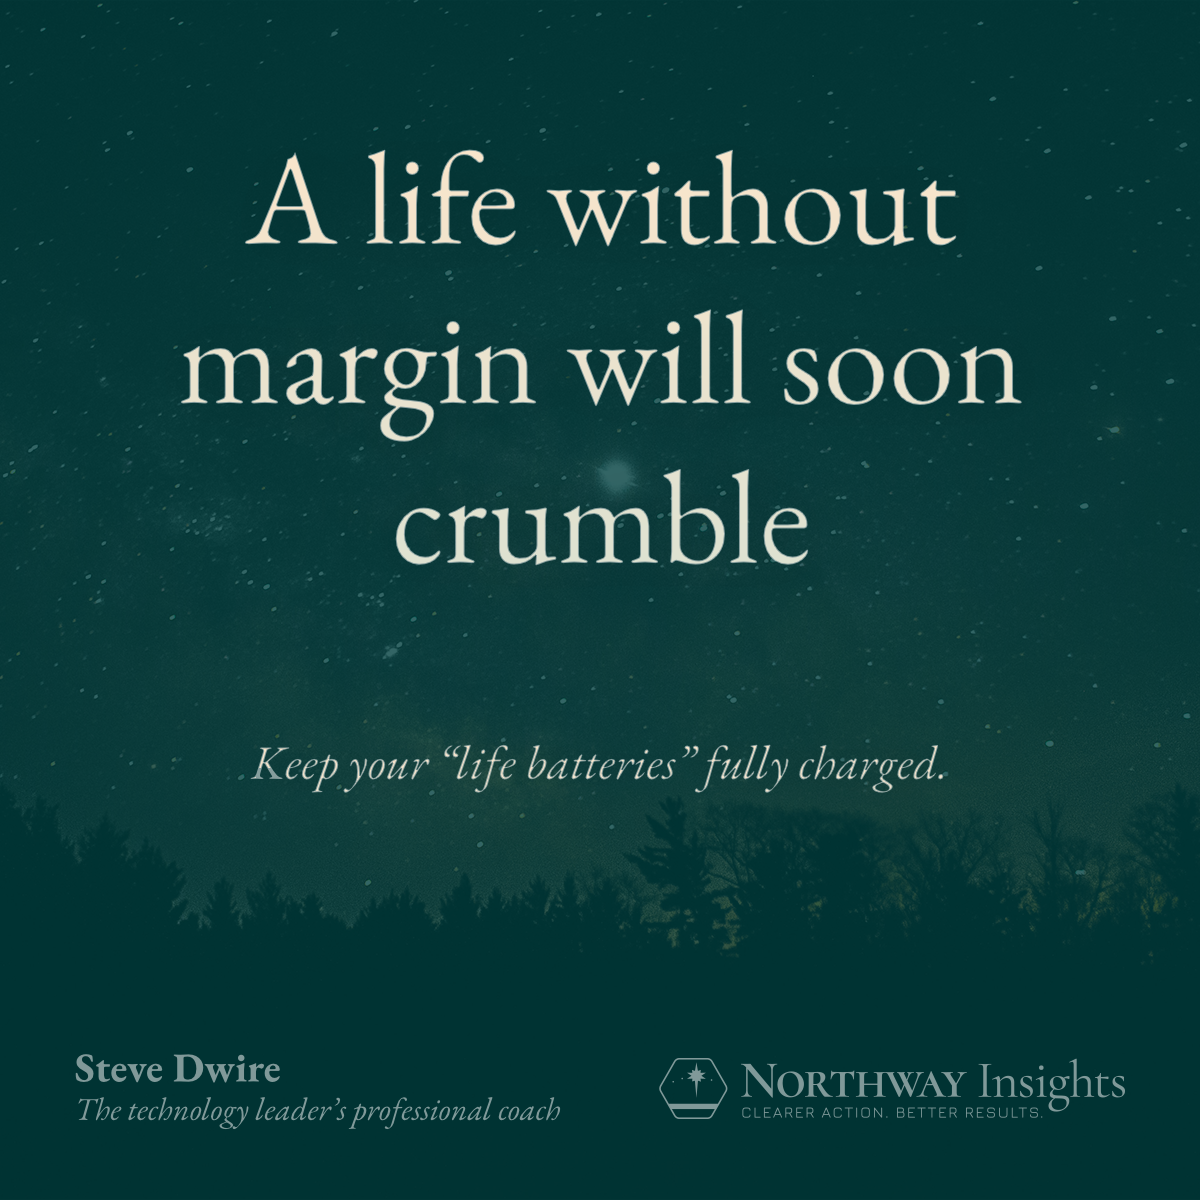 A life without margin will soon crumble